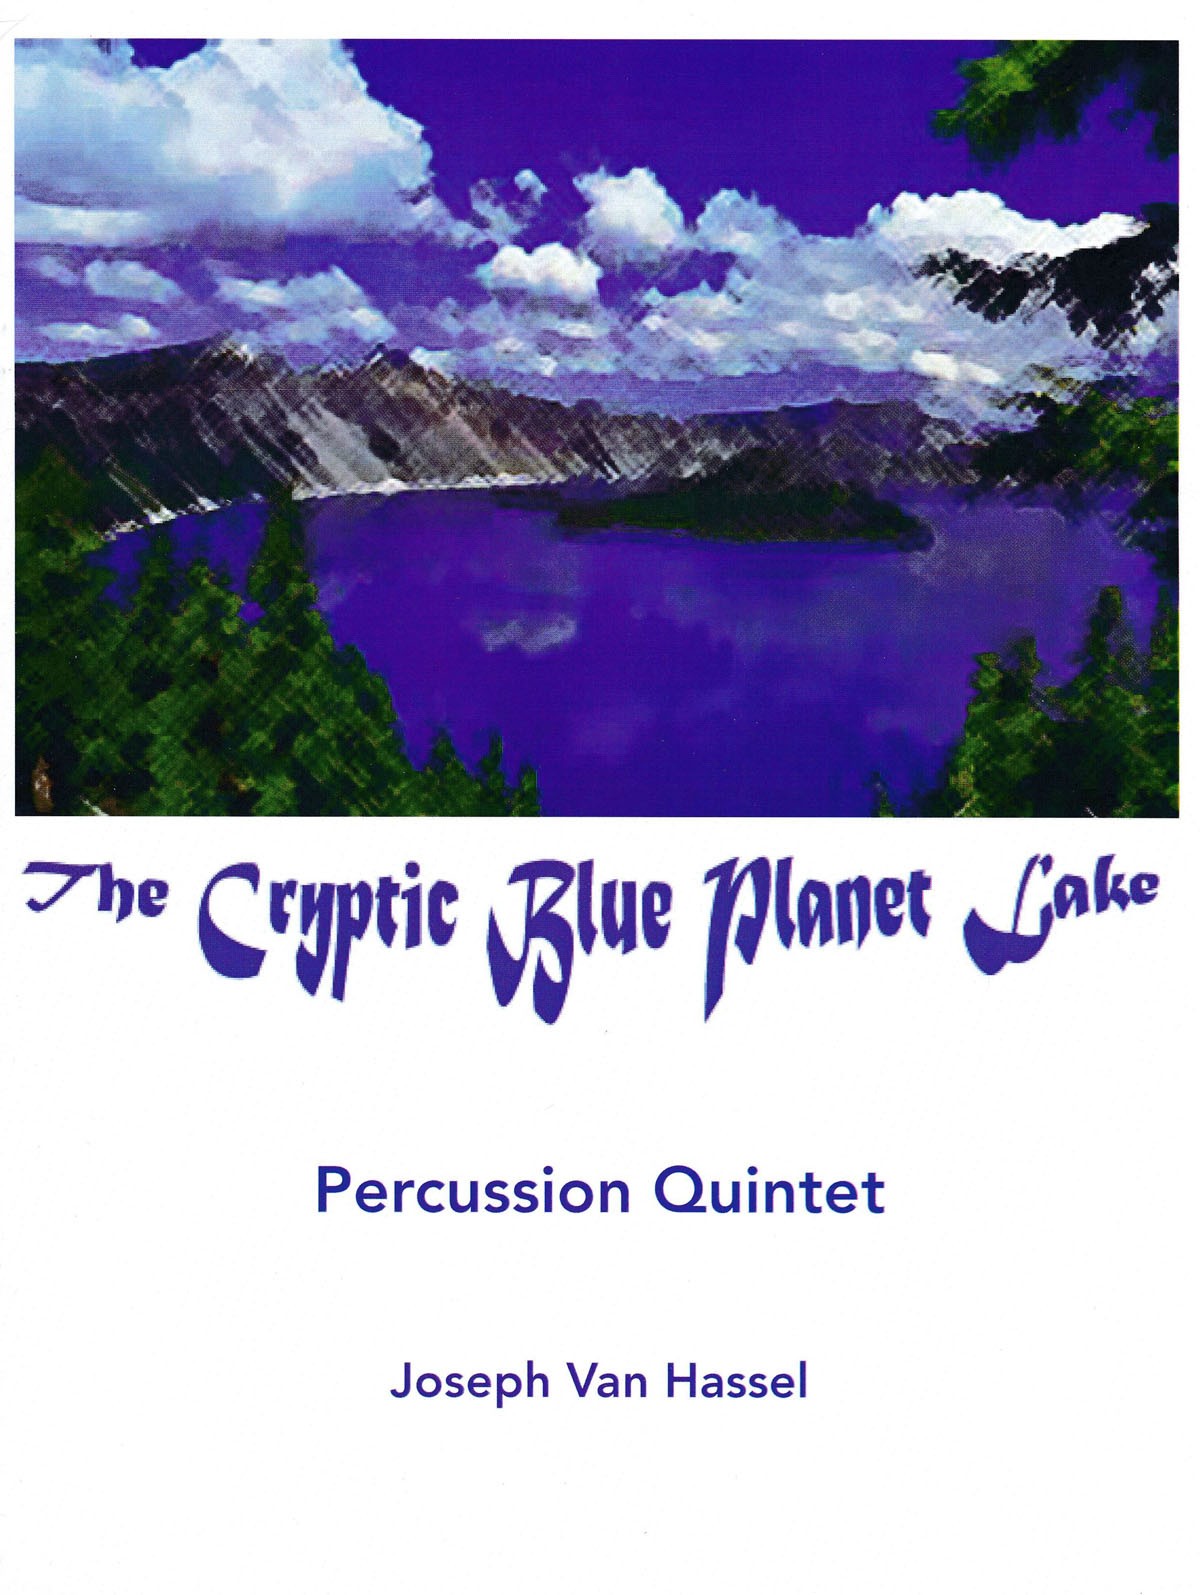 The Cryptic Blue Planet Lake by Joseph Van Hassel